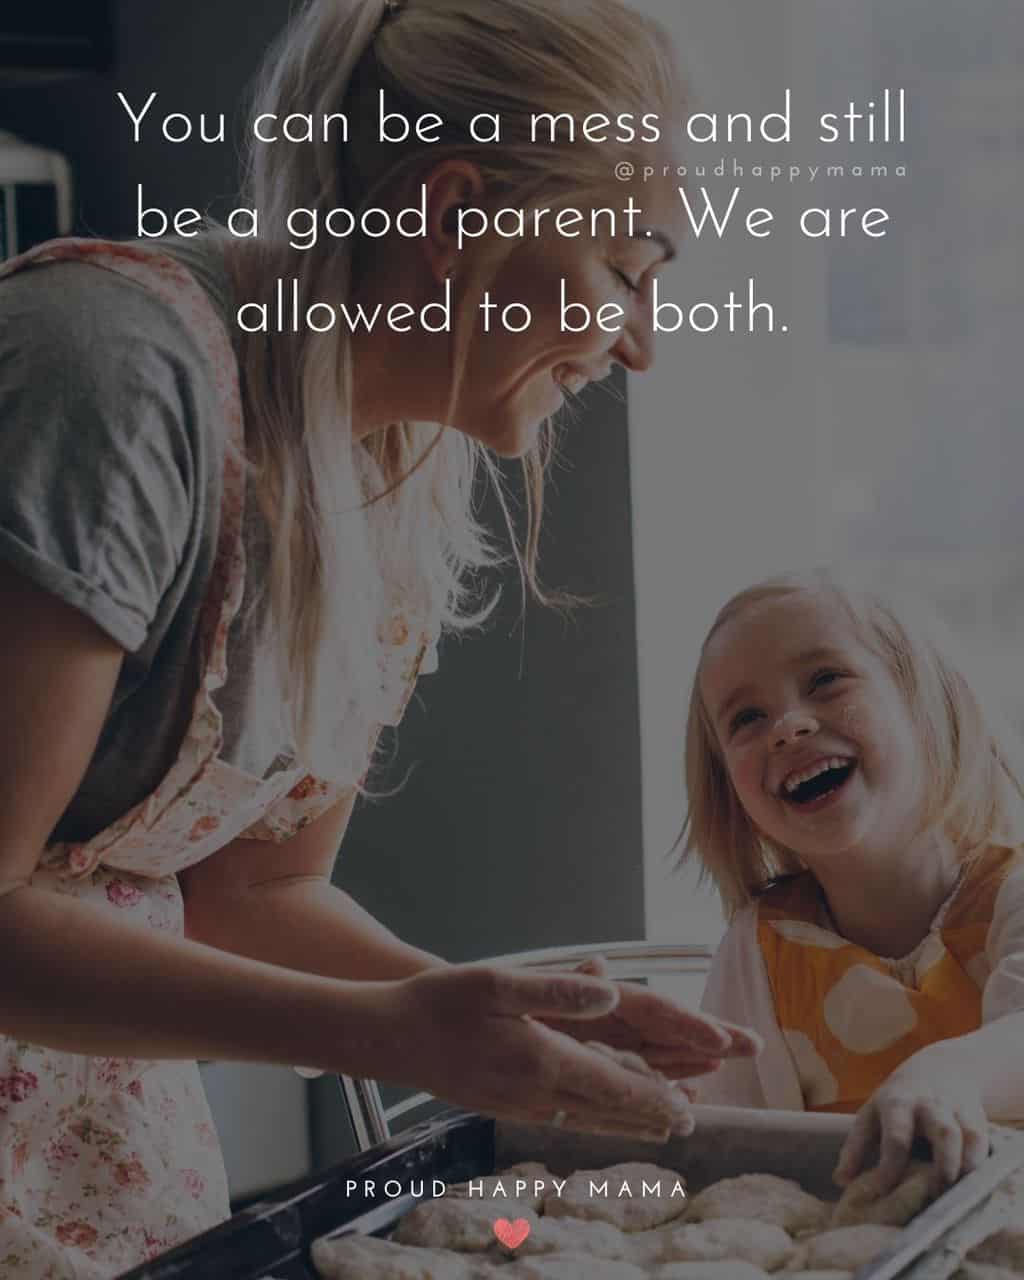 Parenting Quotes - You can be a mess and still be a good parent. We are allowed to be both.’